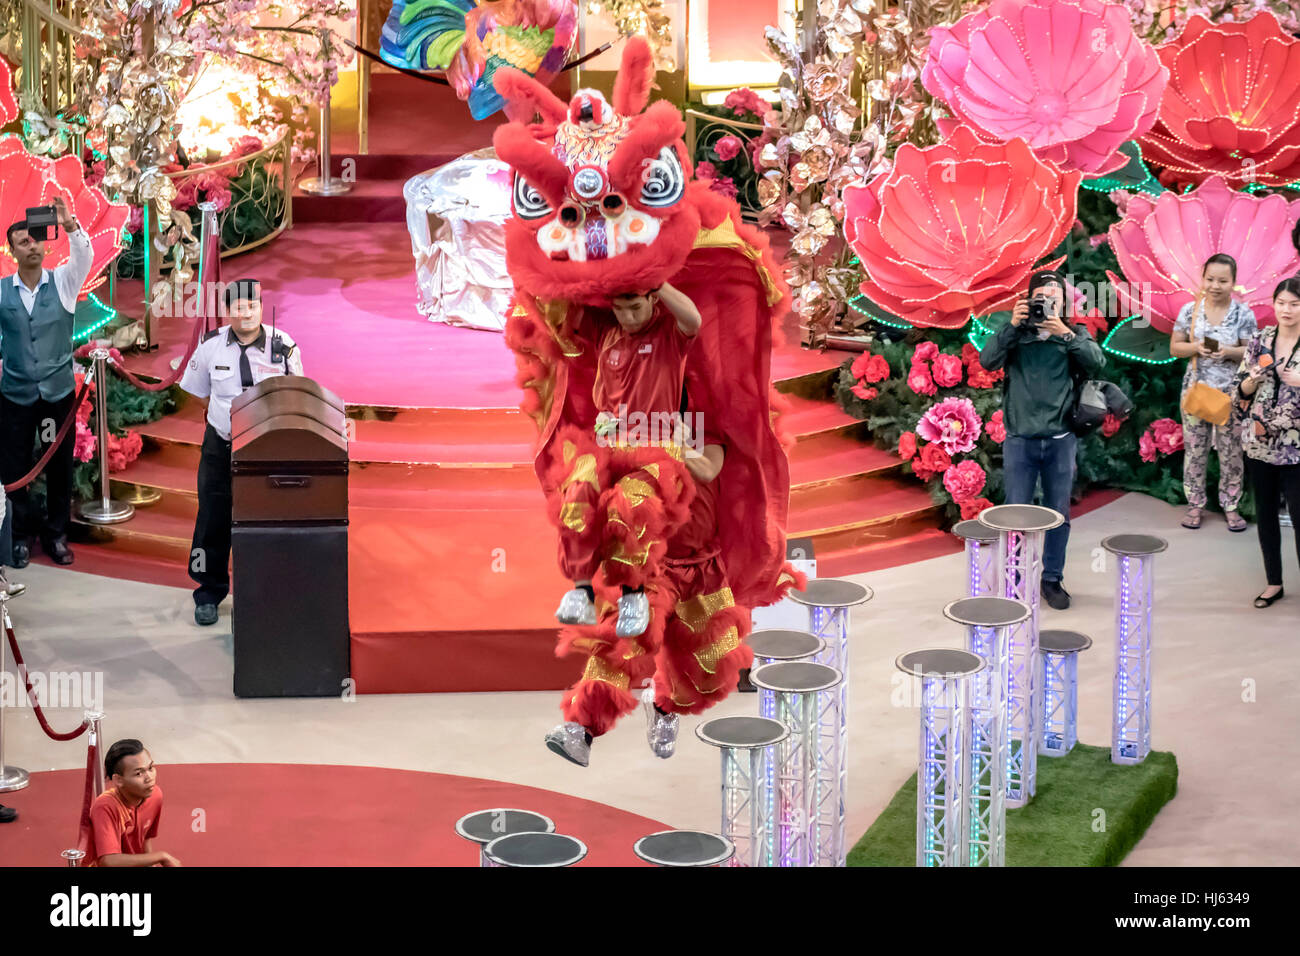 Kuala Lumpur, Malaysia. 21 Jan, 2017. Shopping malls across Kuala Lumpur having acrobatic lion dance performances for the shoppers and tourists to enjoy during the coming Chinese New Year 2017 festival in Kuala Lumpur. © Danny Chan/Alamy Live News. Stock Photo